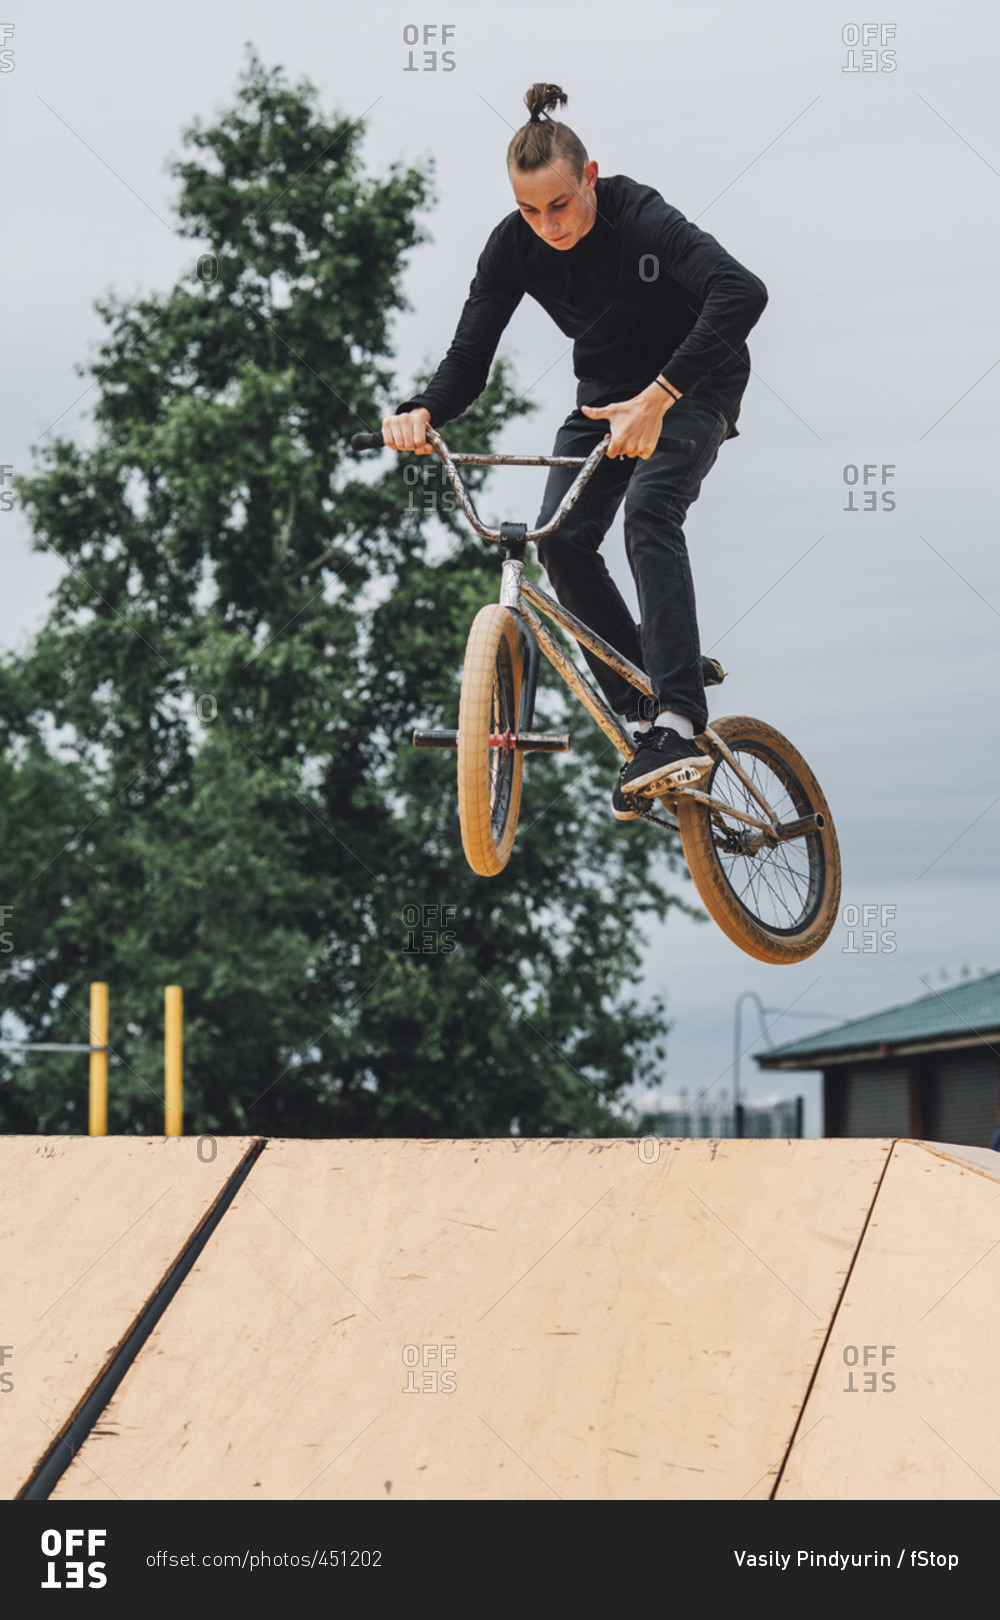 Low angle view of teenager performing stunt on ramp at skateboard park